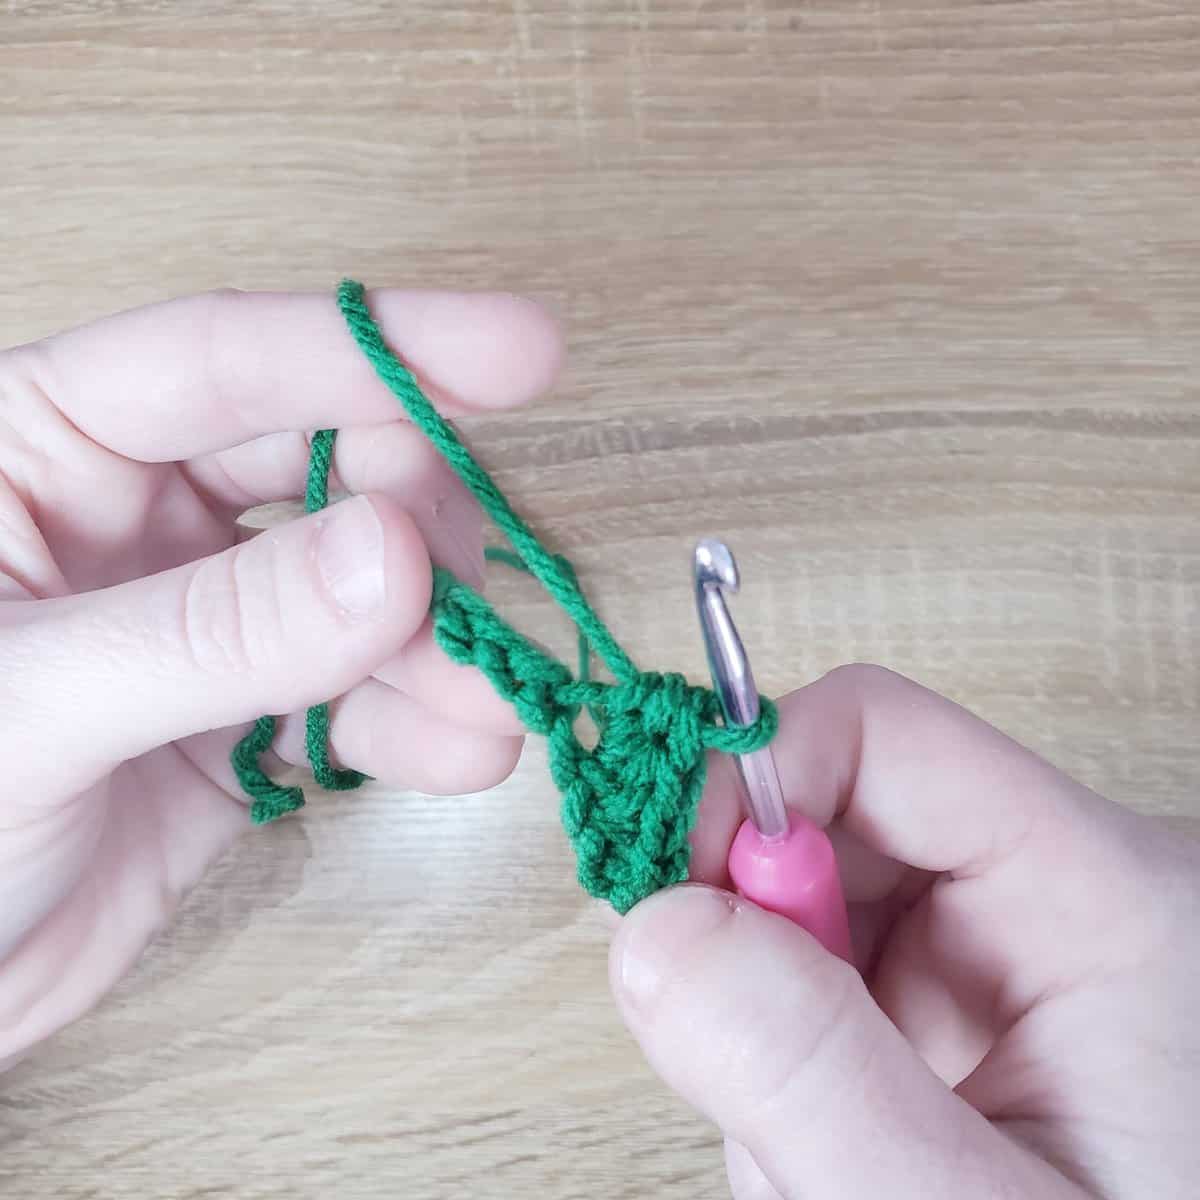 placing two half-double crochet stitches in the next stitch